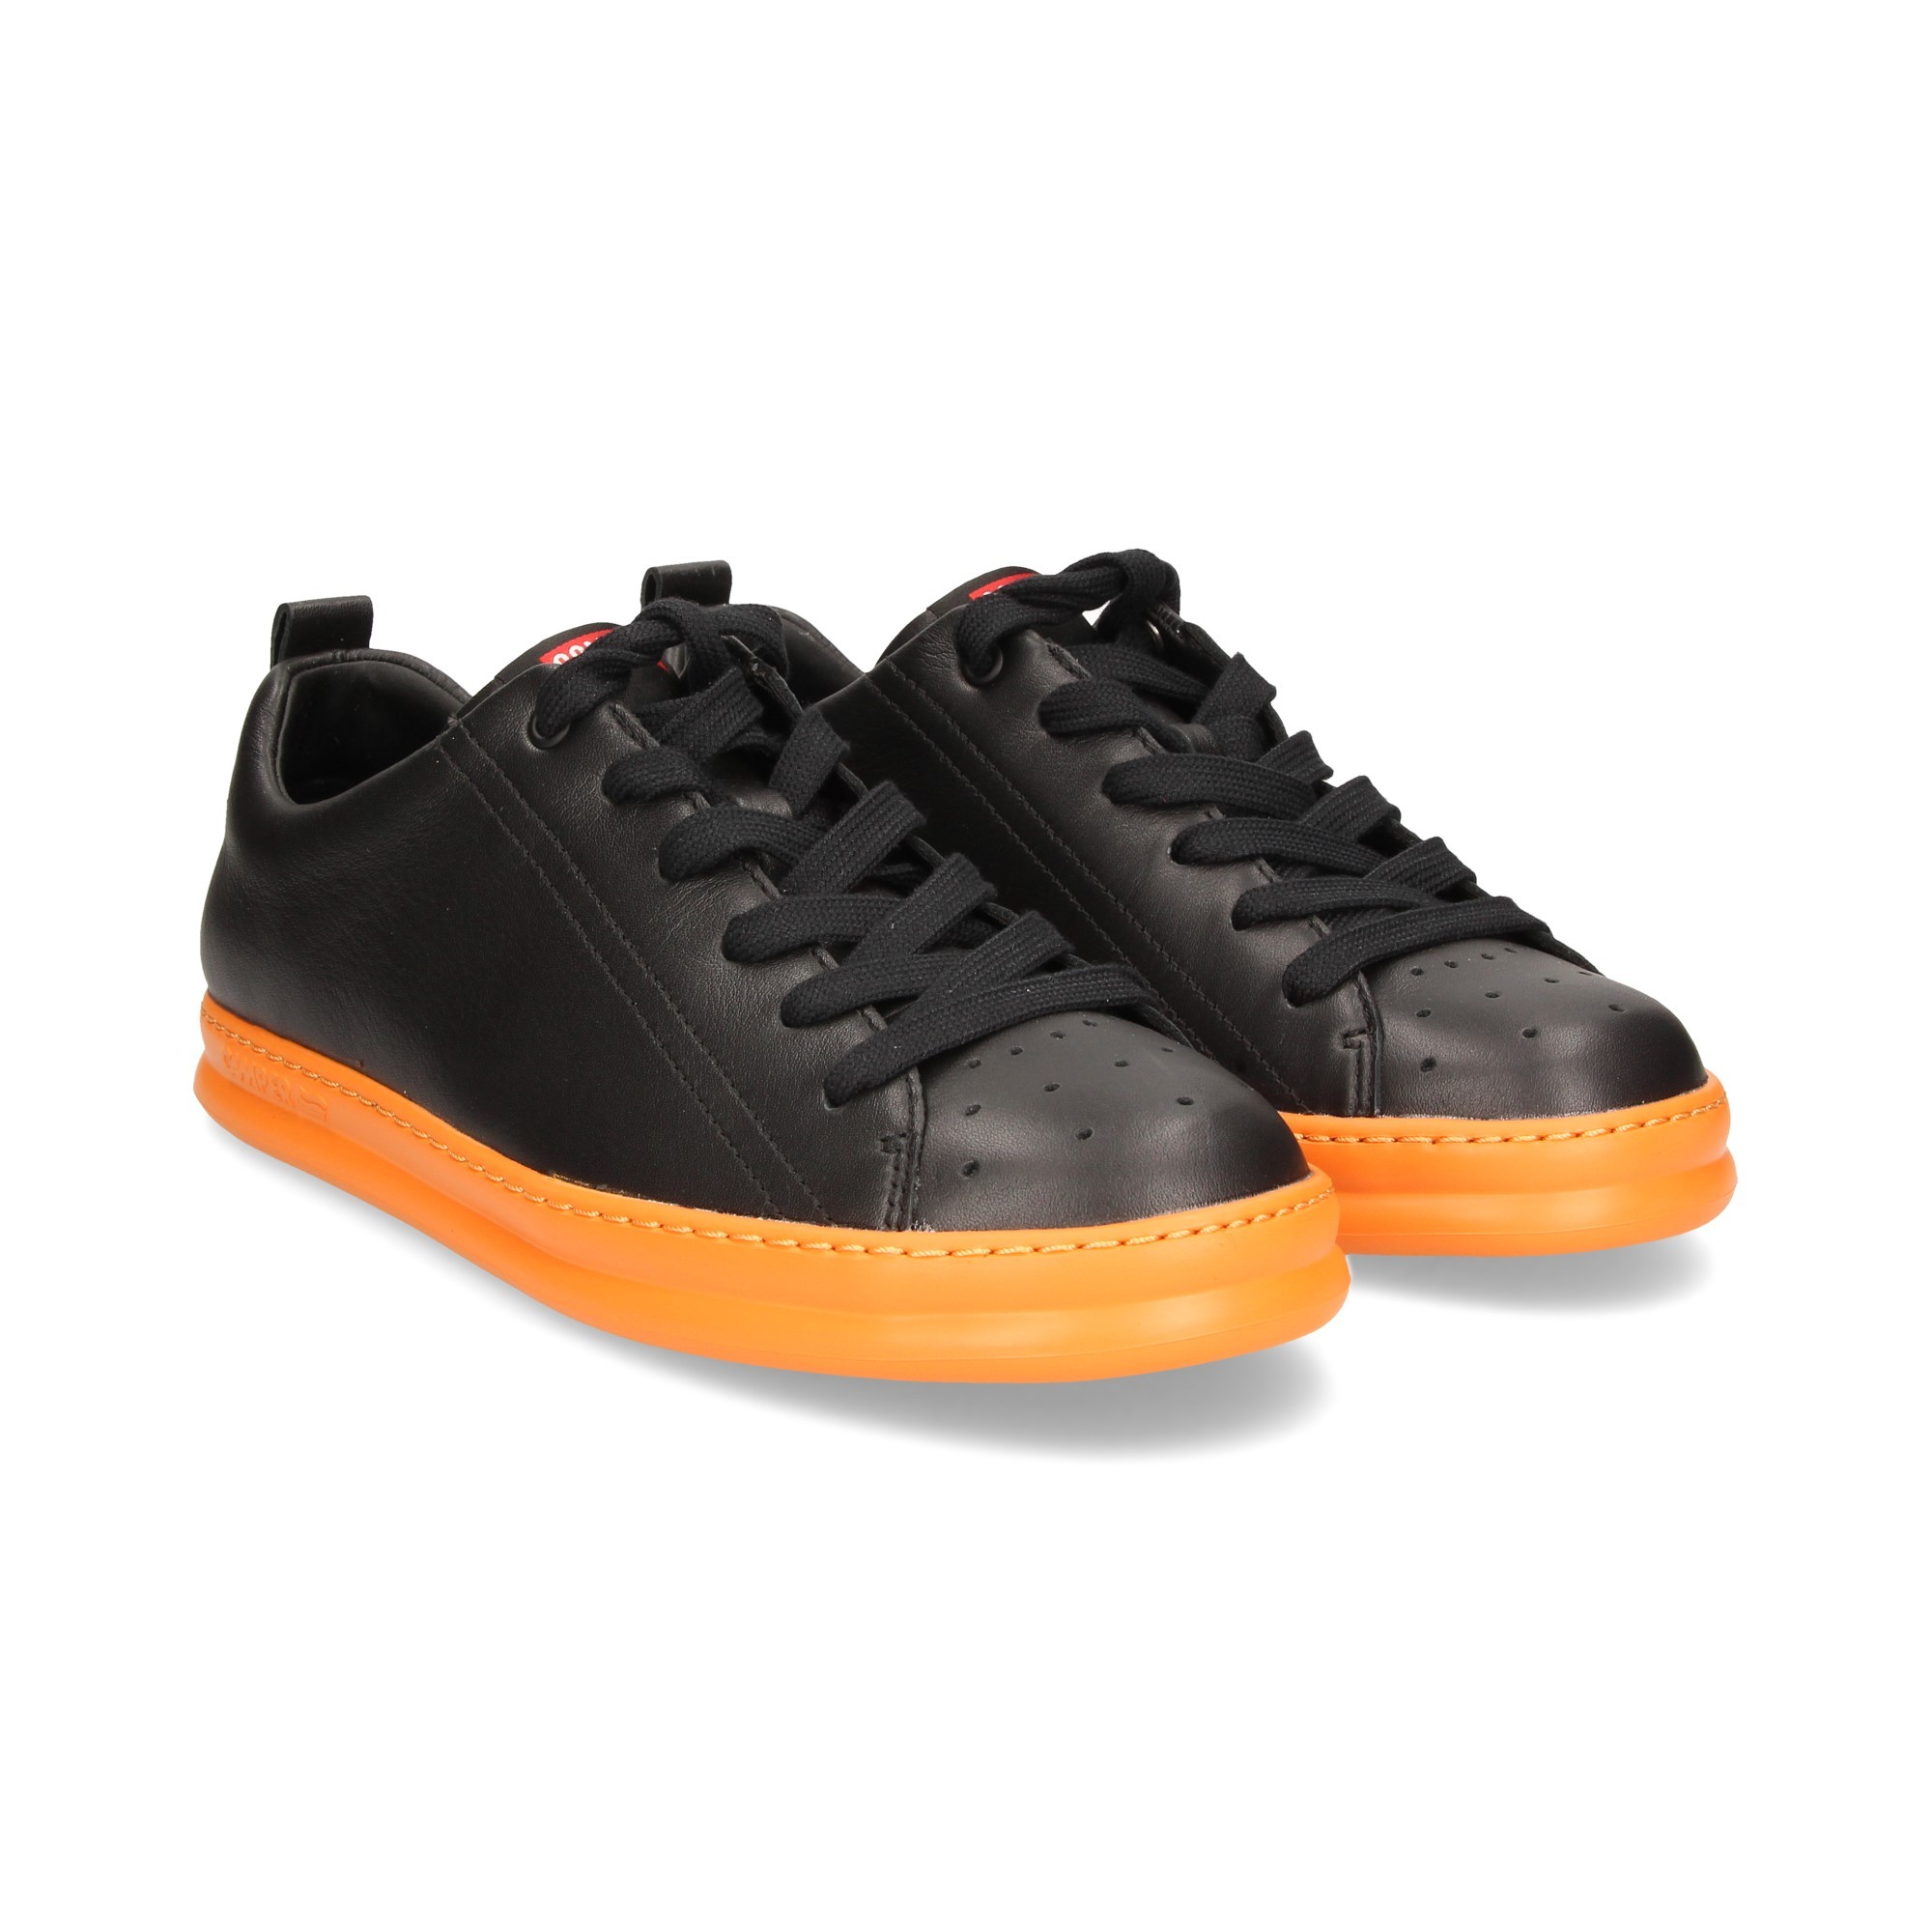 sporty-sole-waves-black-leather